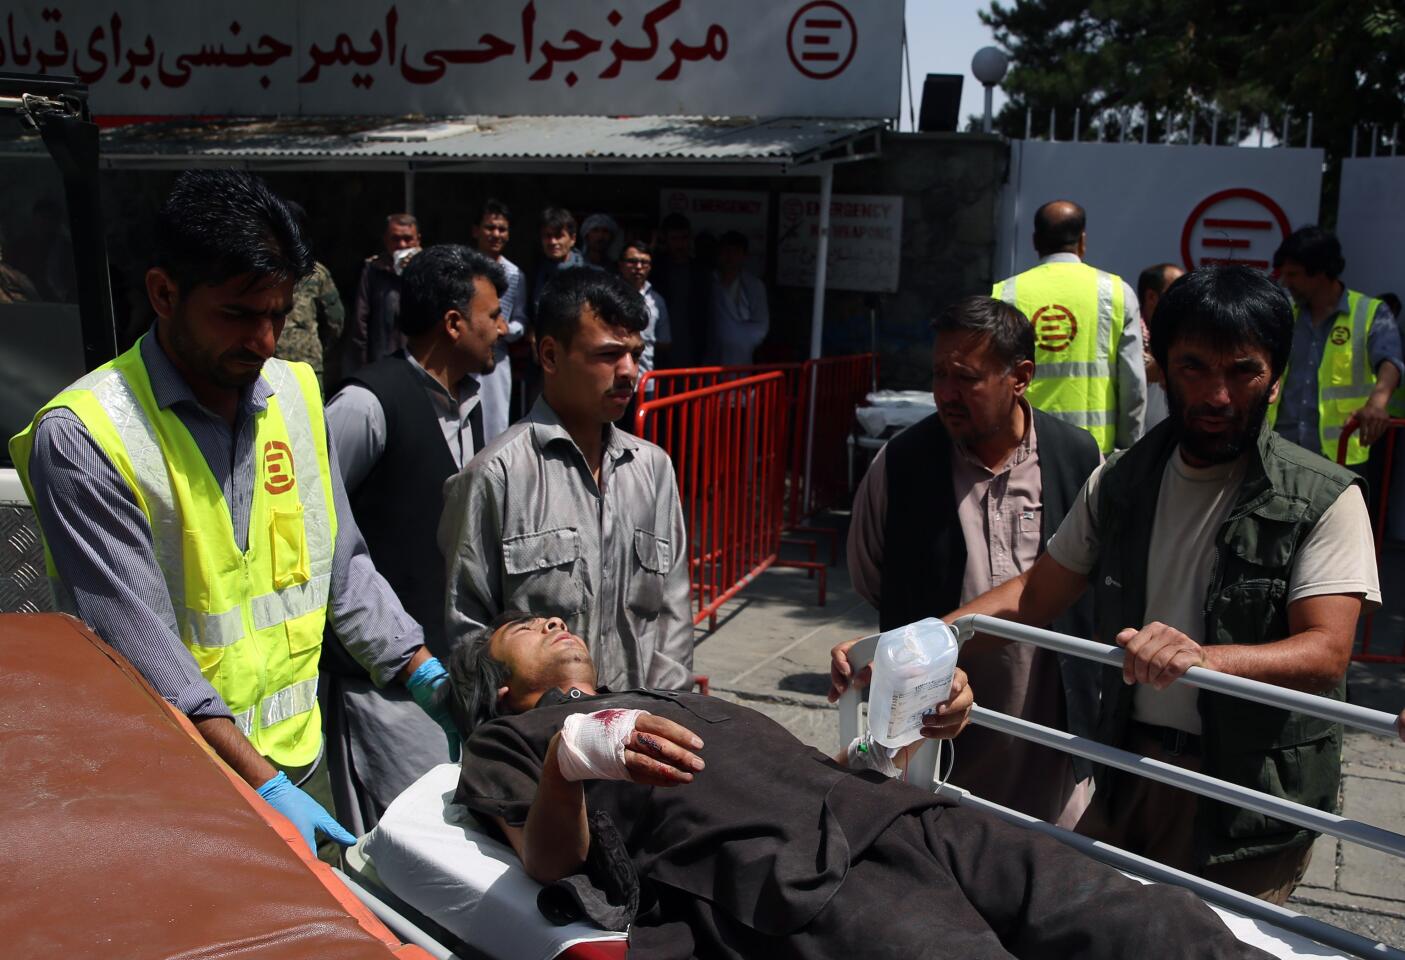 Afghan health workers take a wounded man to a hospital after an explosion Aug. 7 in Kabul.